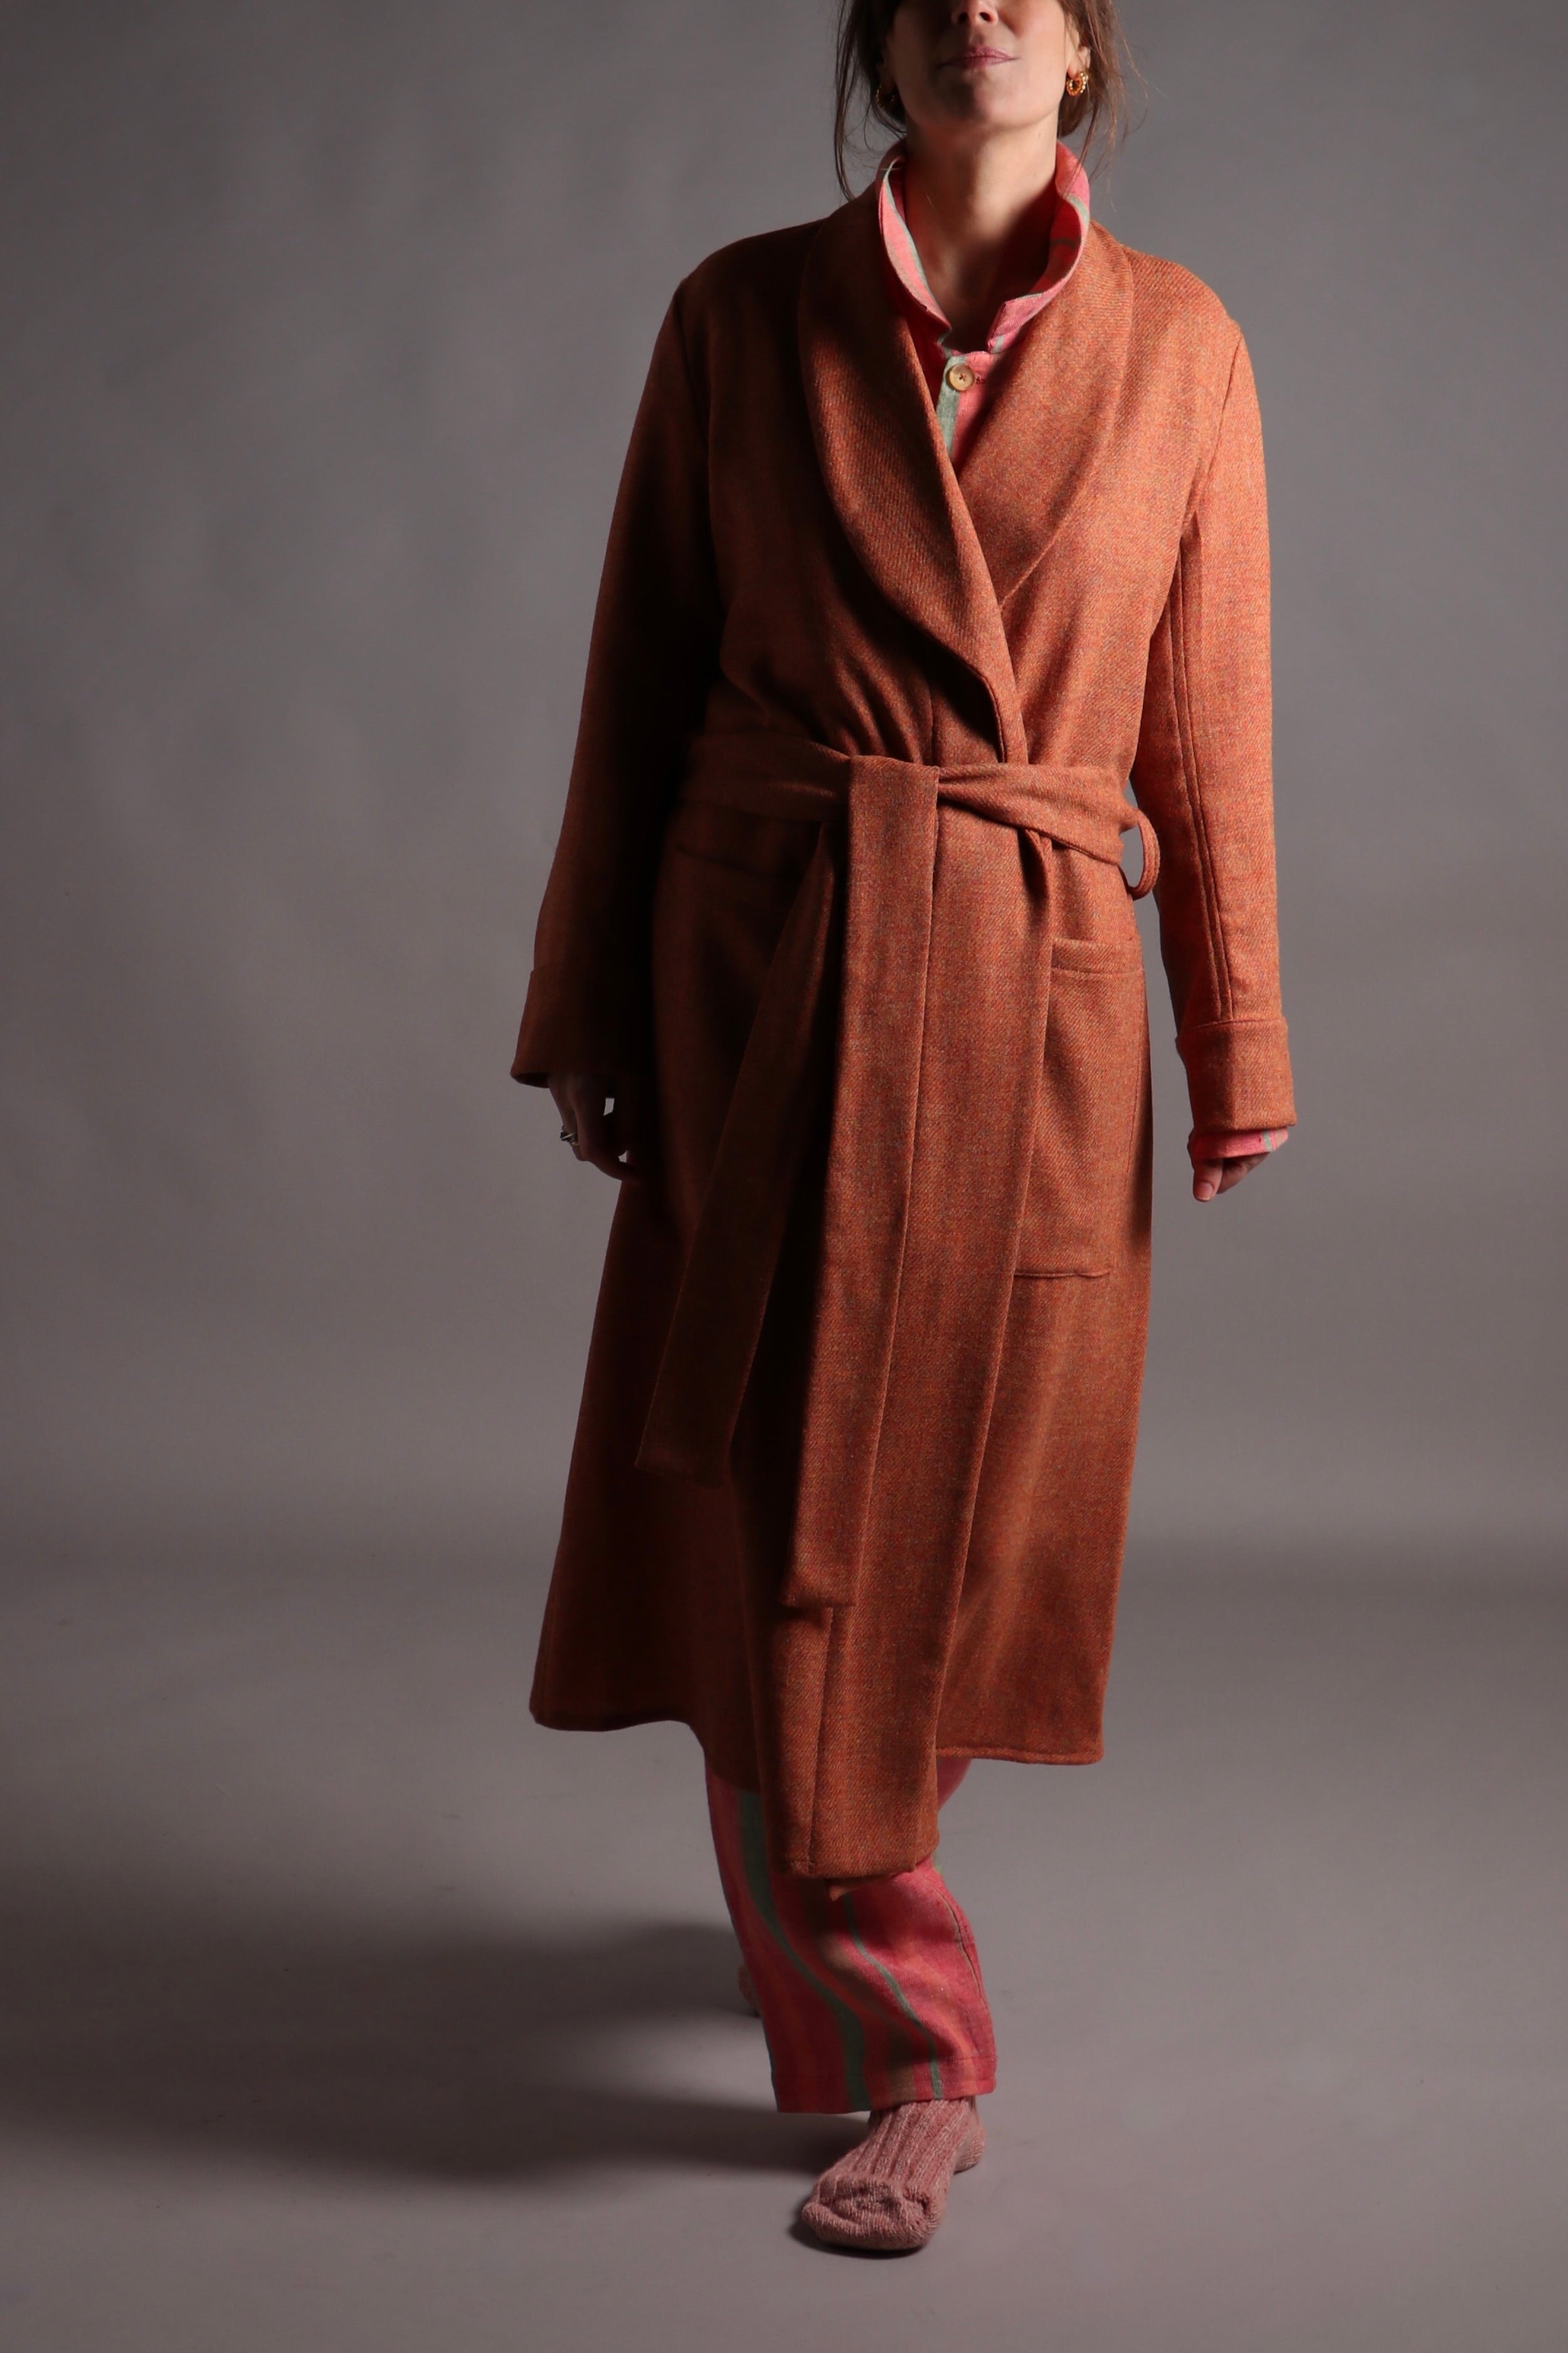 Kate wears Carrier Company Wool Dressing Gown in Amber and Striped Linen Pyjamas